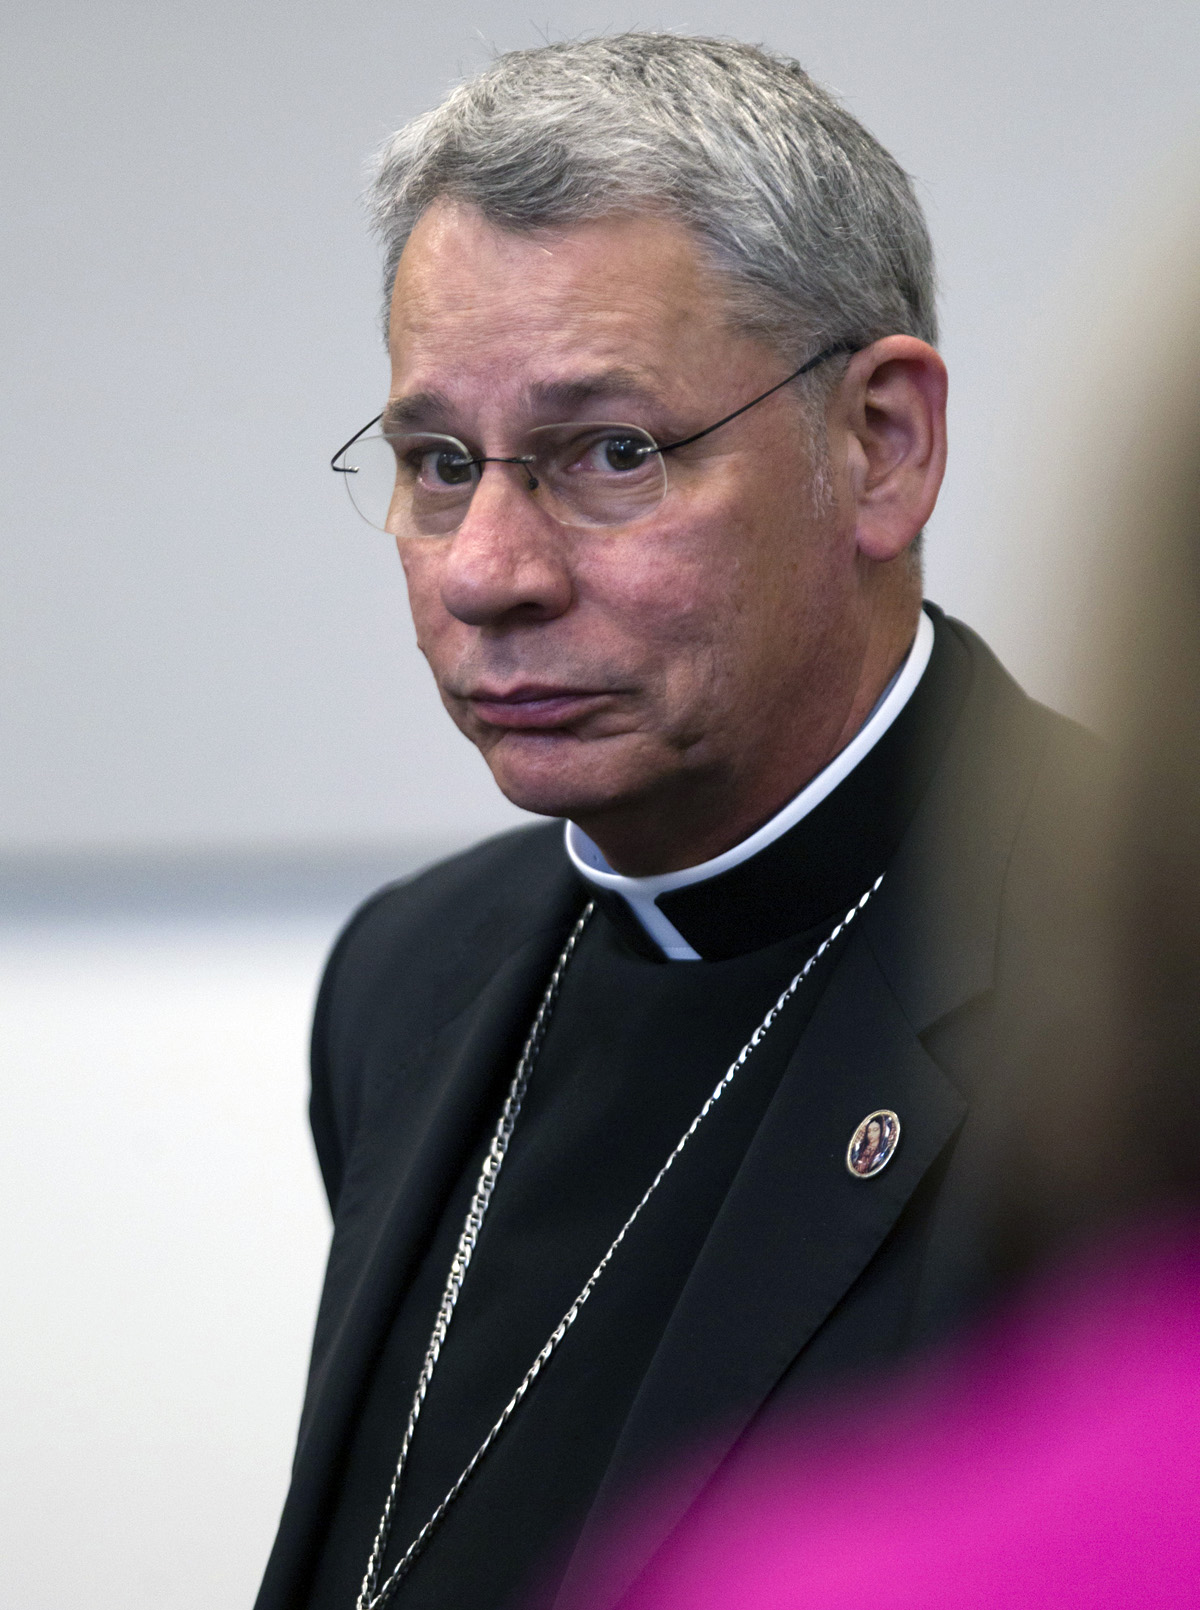 Bishop Robert Finn of the Diocese of Kansas City-St. Joseph appears during a bench trial Sept. 6, 2012 at the Jackson County Courthouse in Kansas City, Mo. (Tammy Ljungblad—AP)